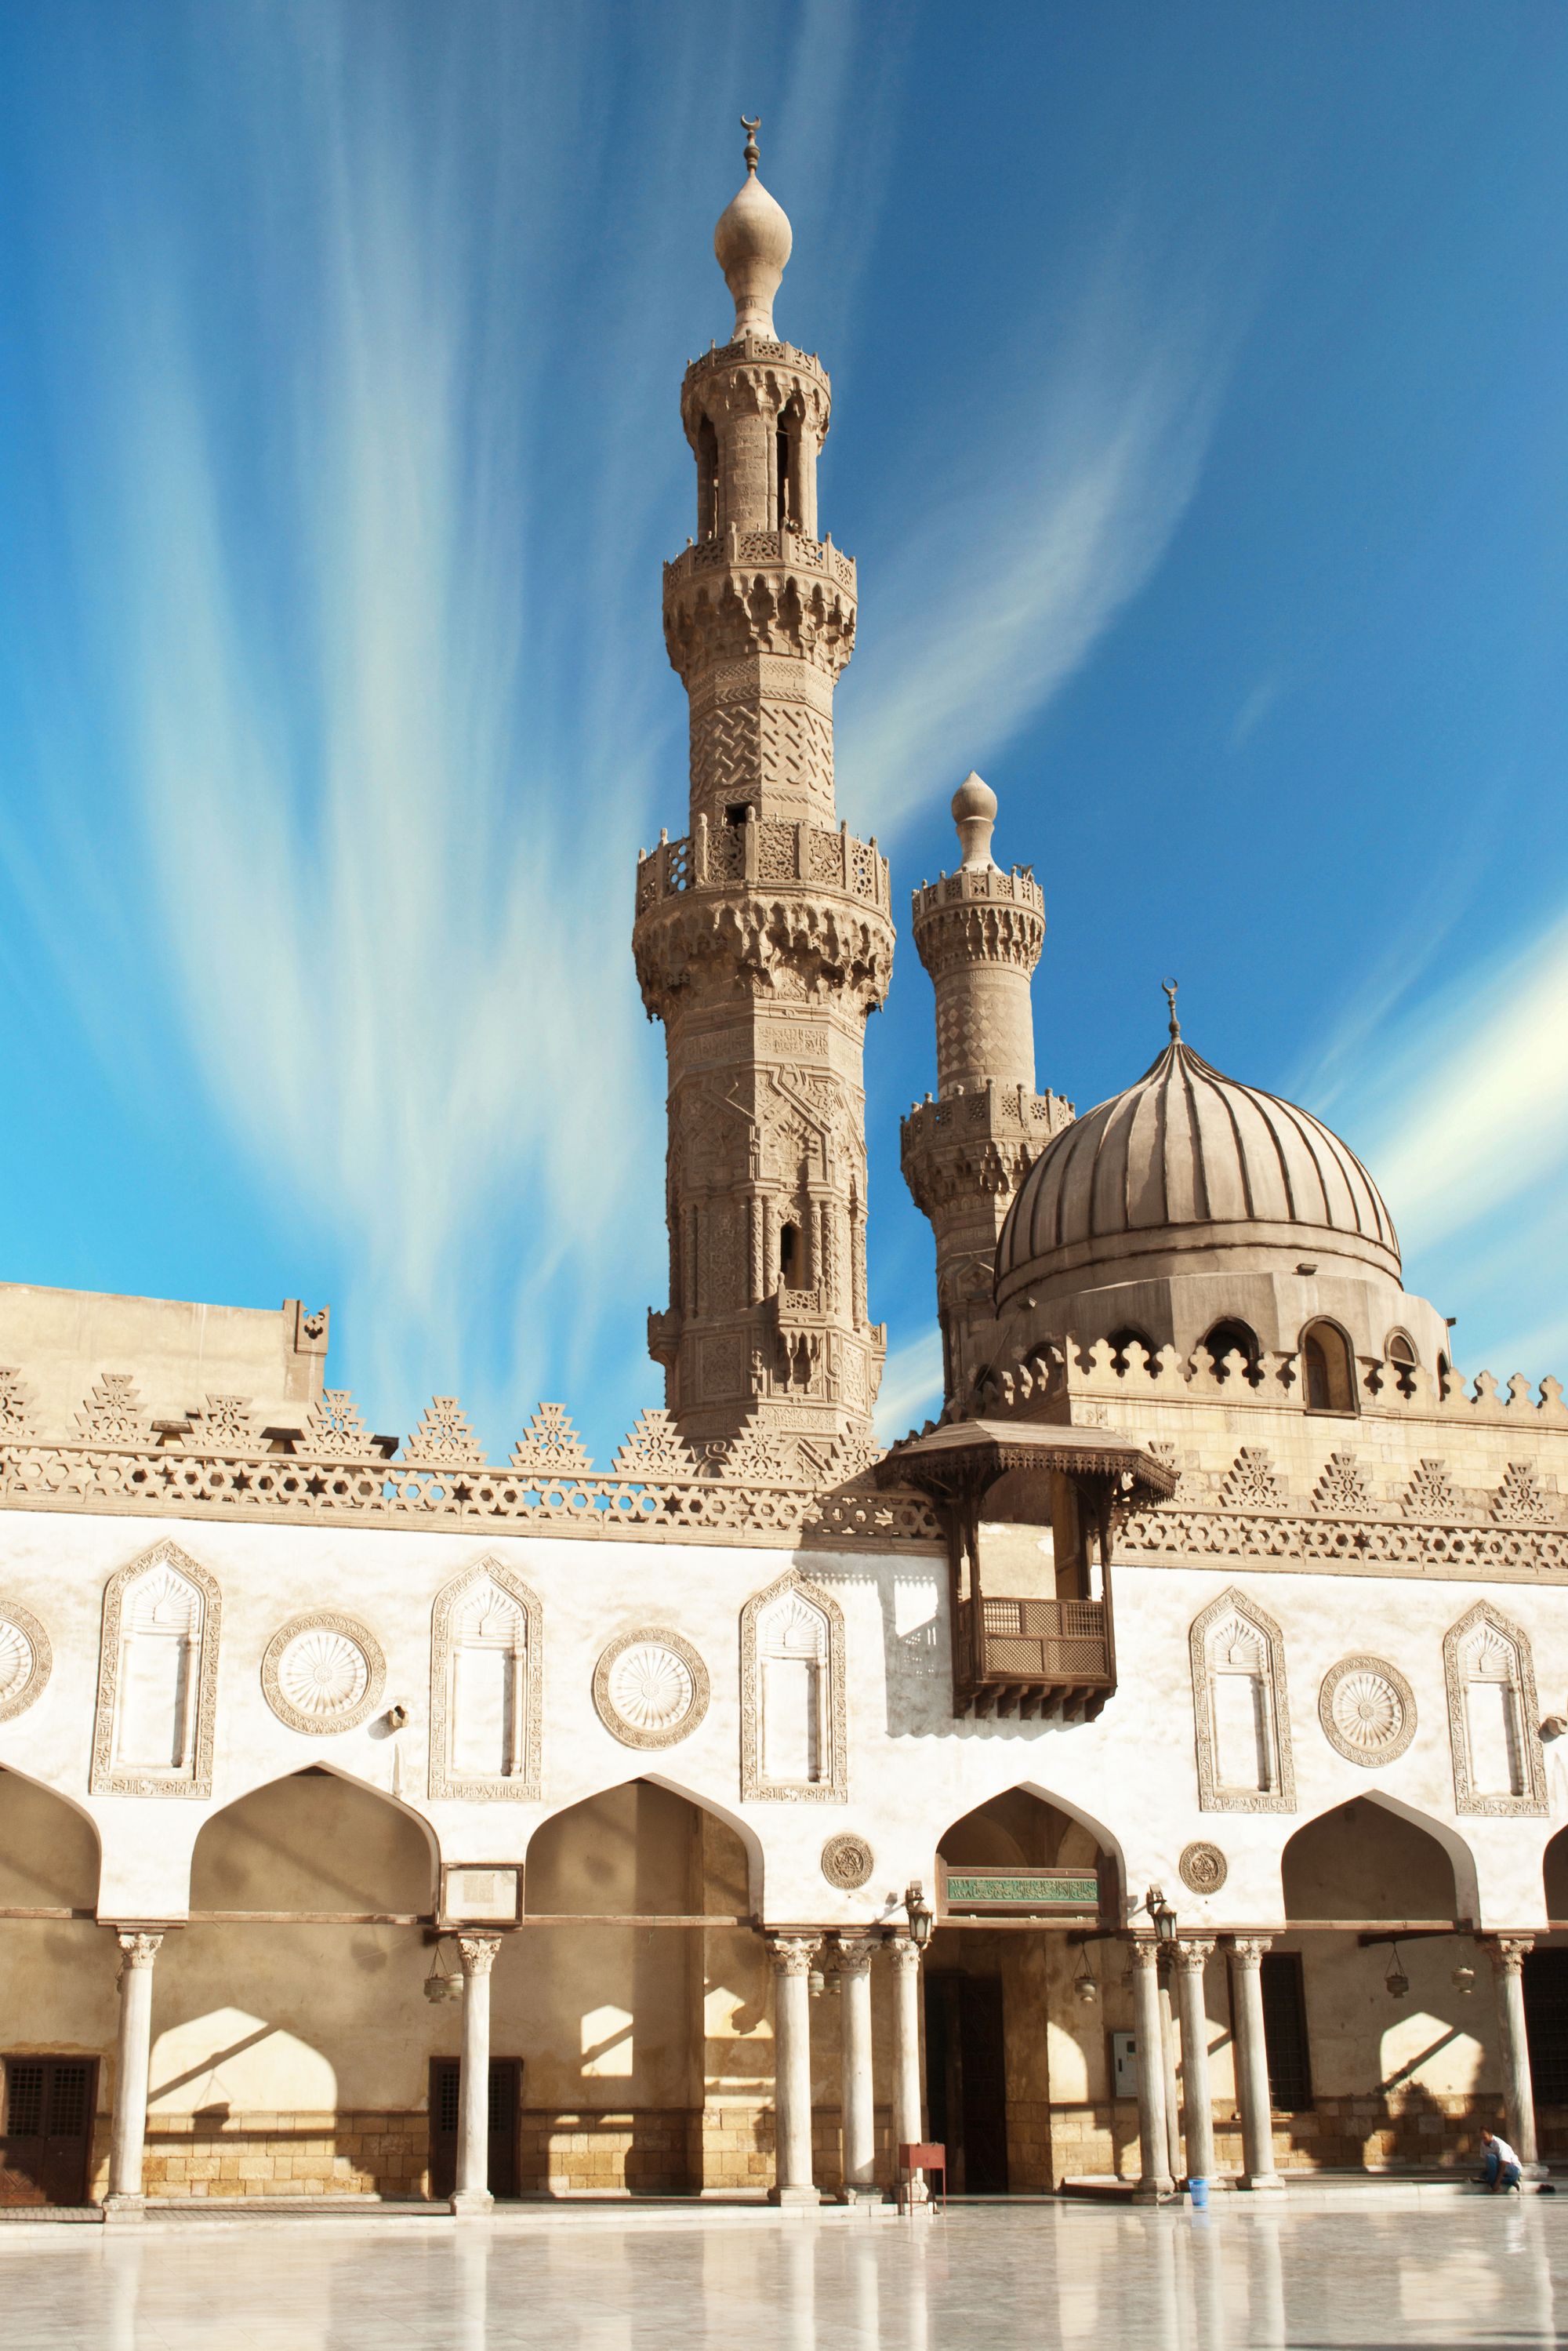 Al-Azhar University, founded in 975AD, is the centre of Arabic literature and Islamic learning in the world